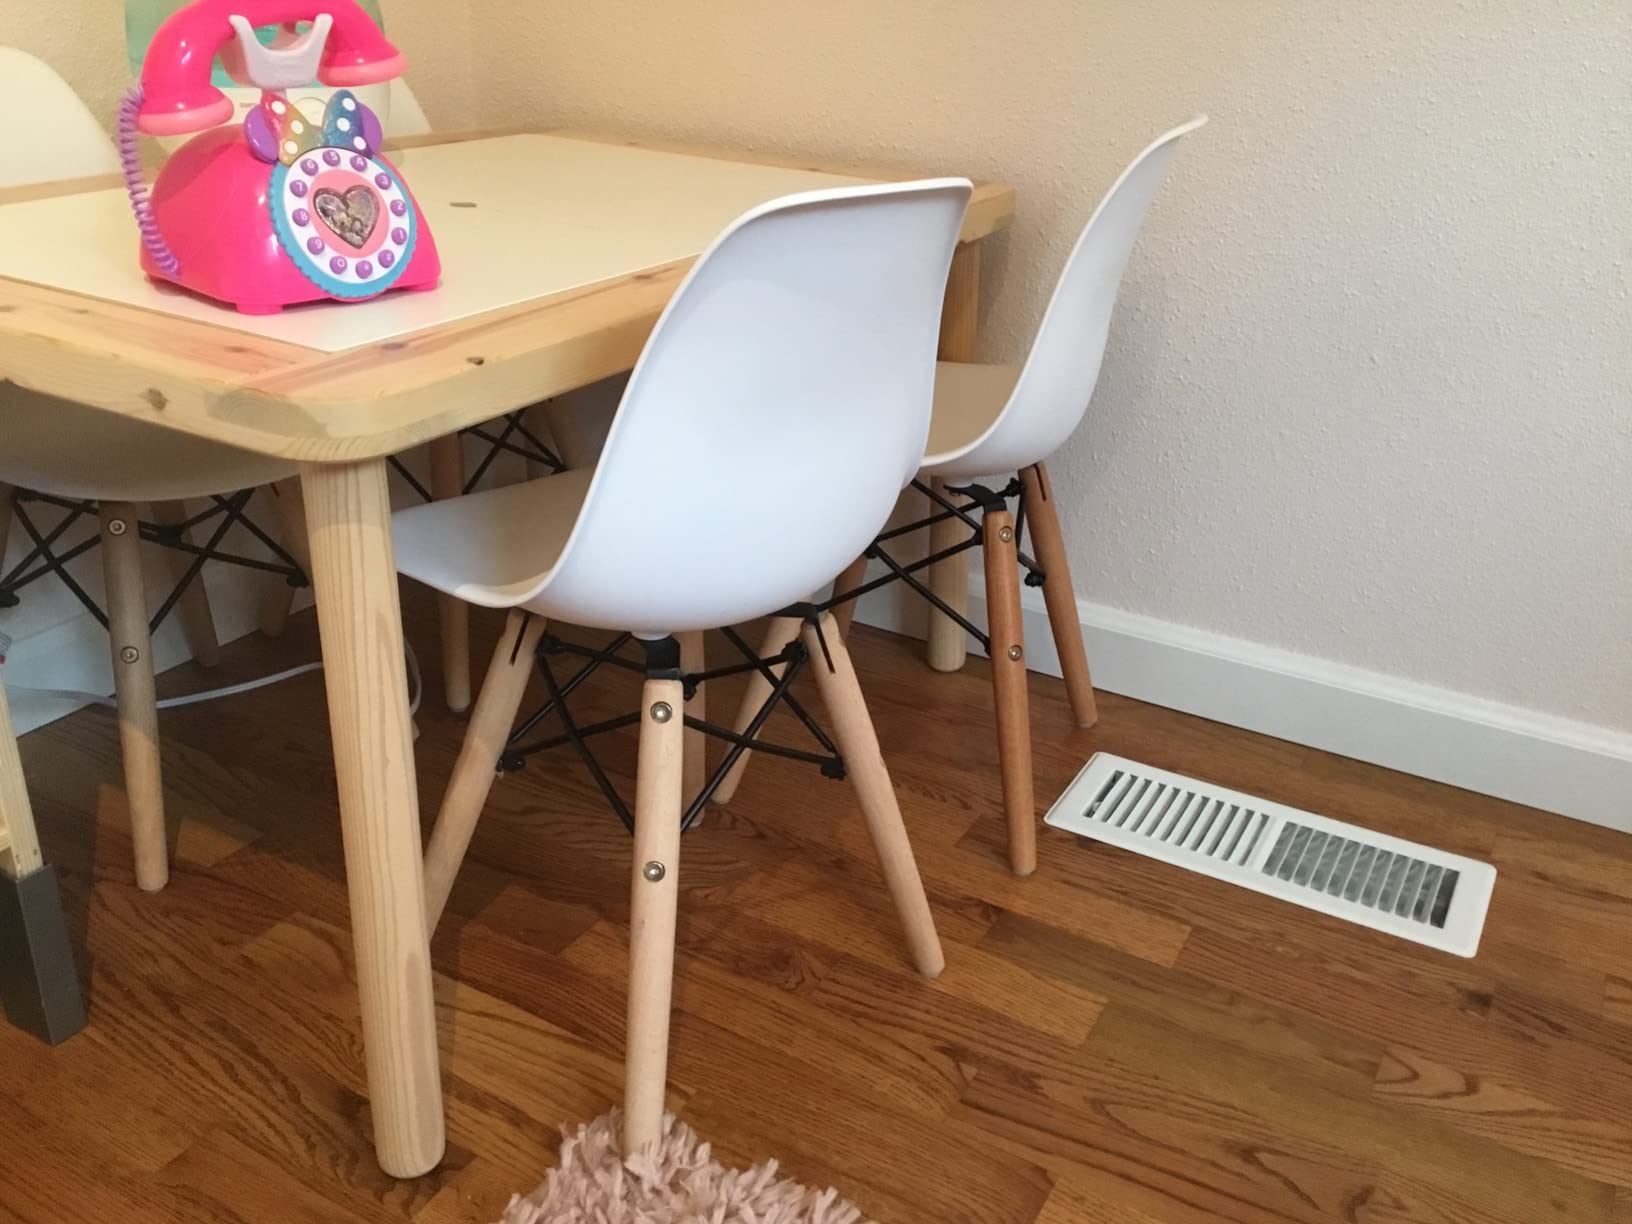 Stylish chairs for young kids/toddlers